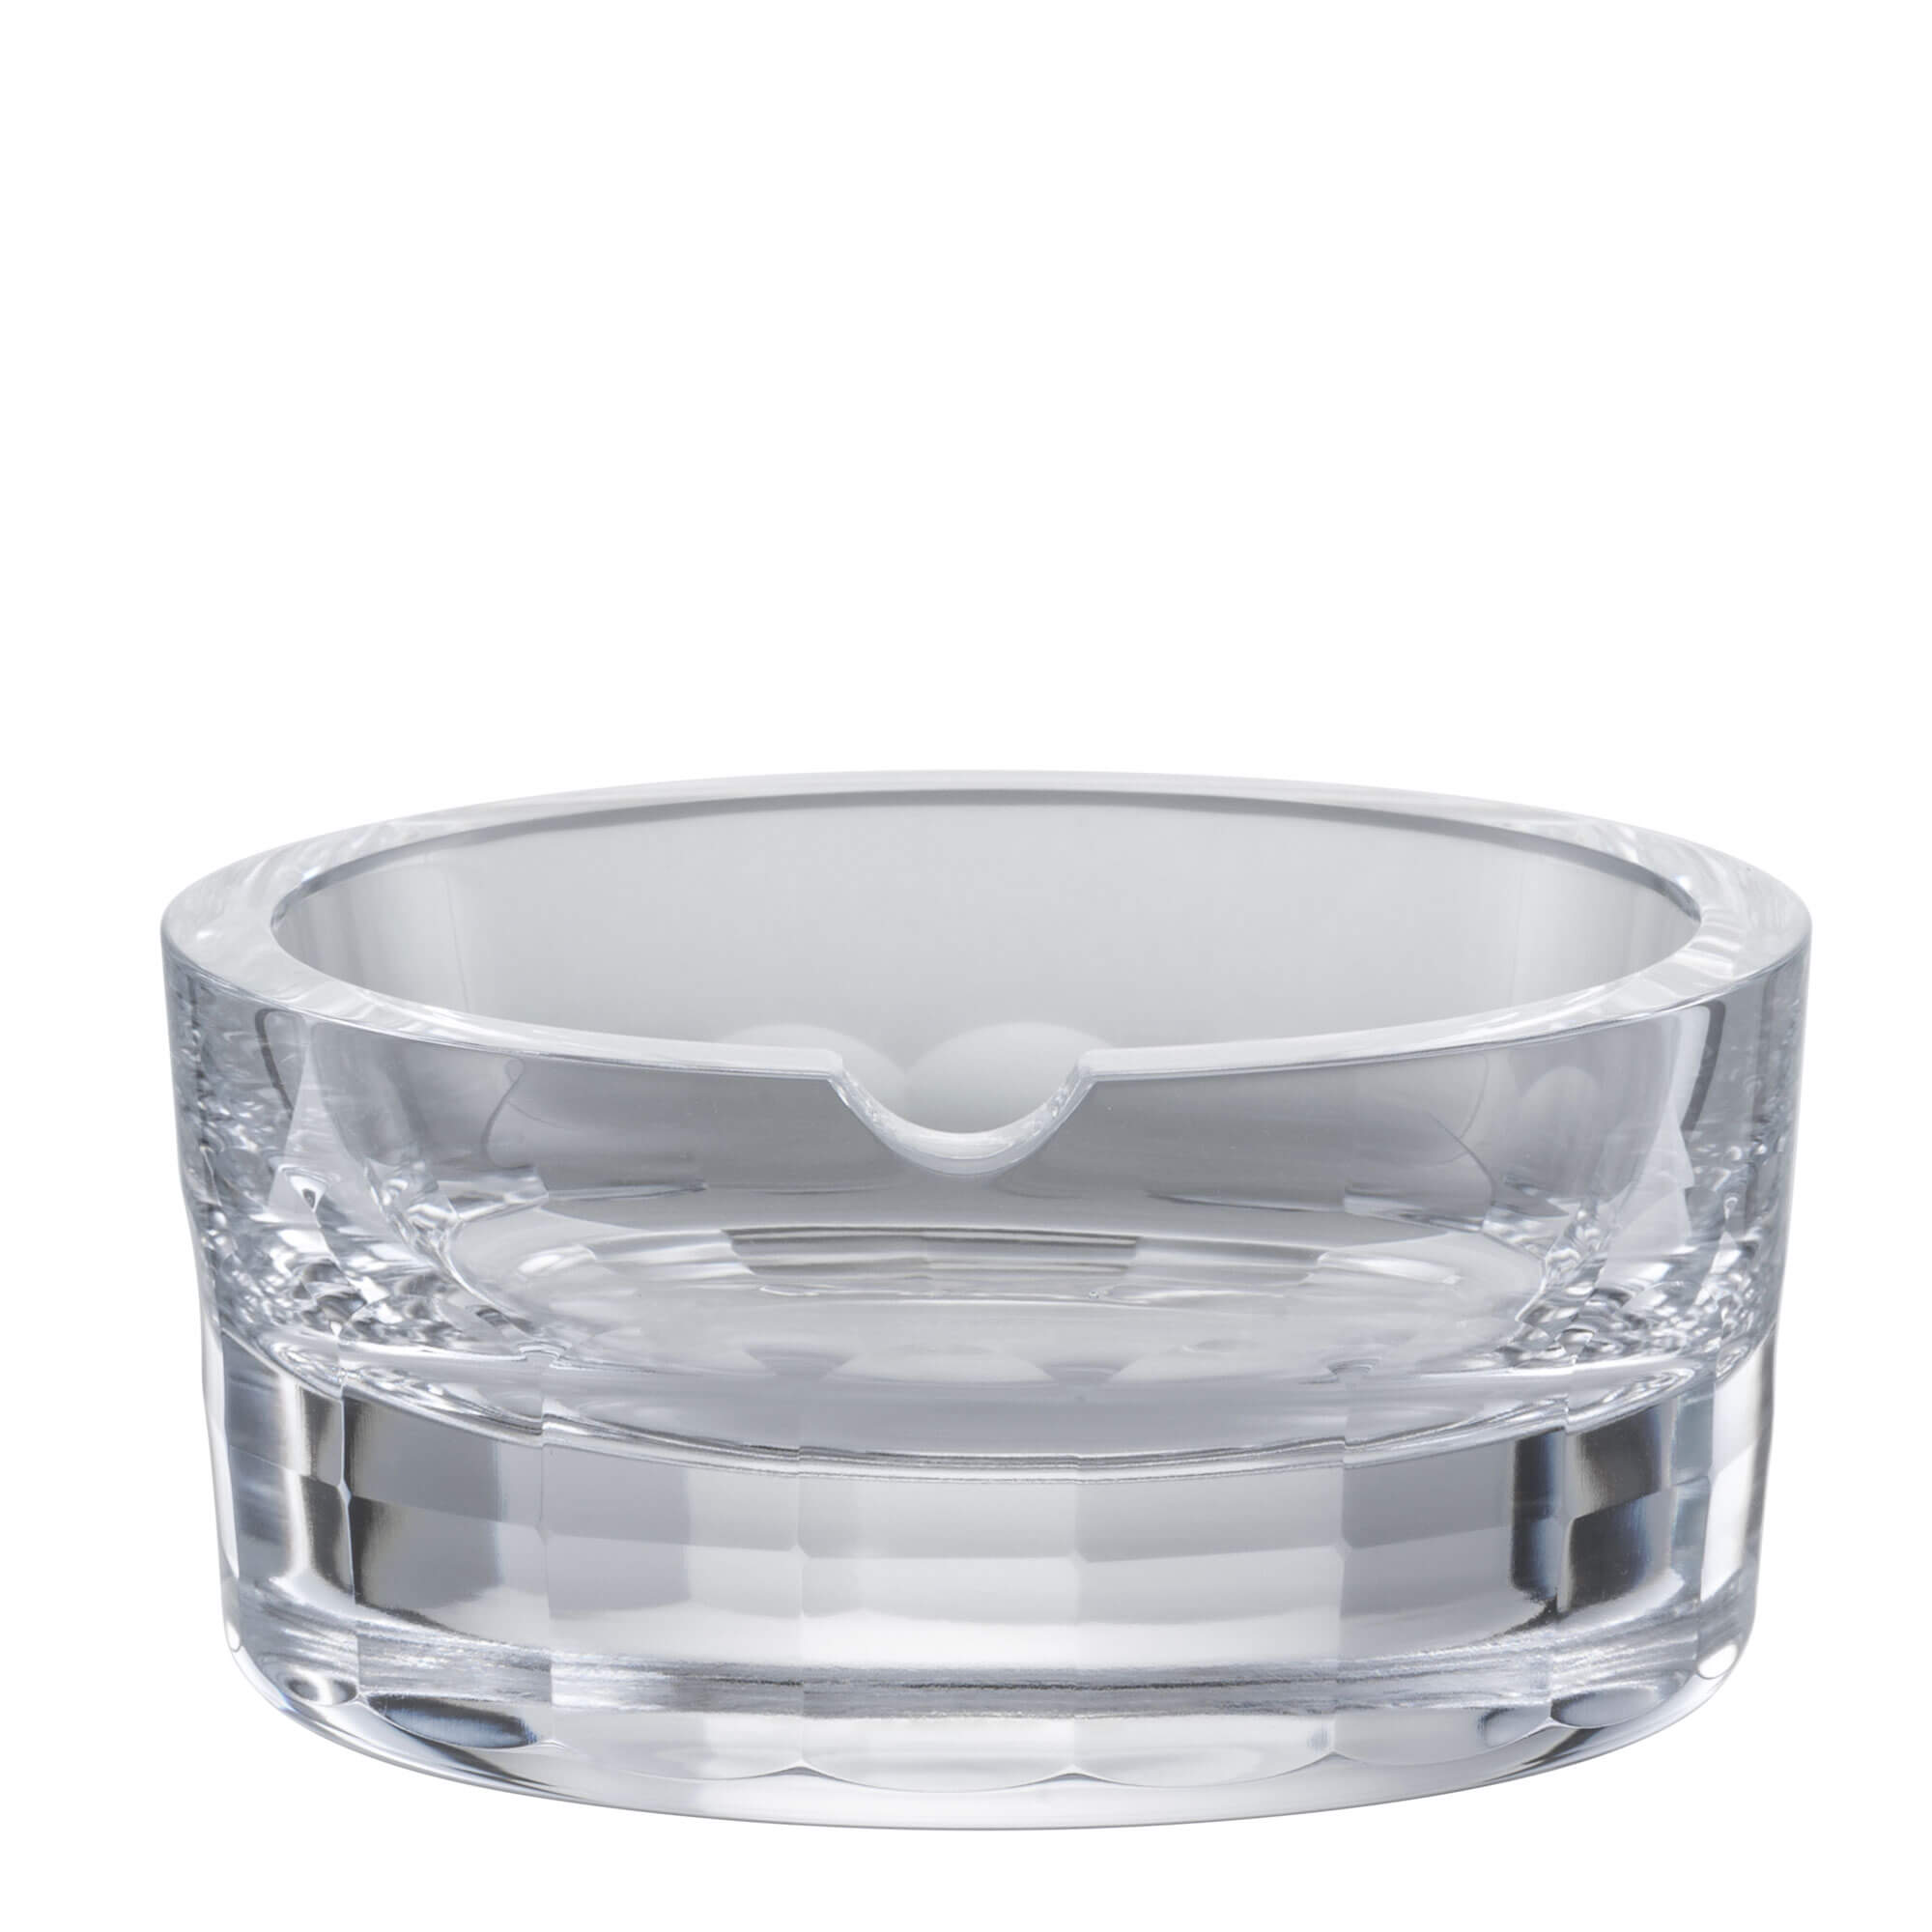 Ashtray Hommage Carat, Zwiesel Glas - 92mm (1 pc.)